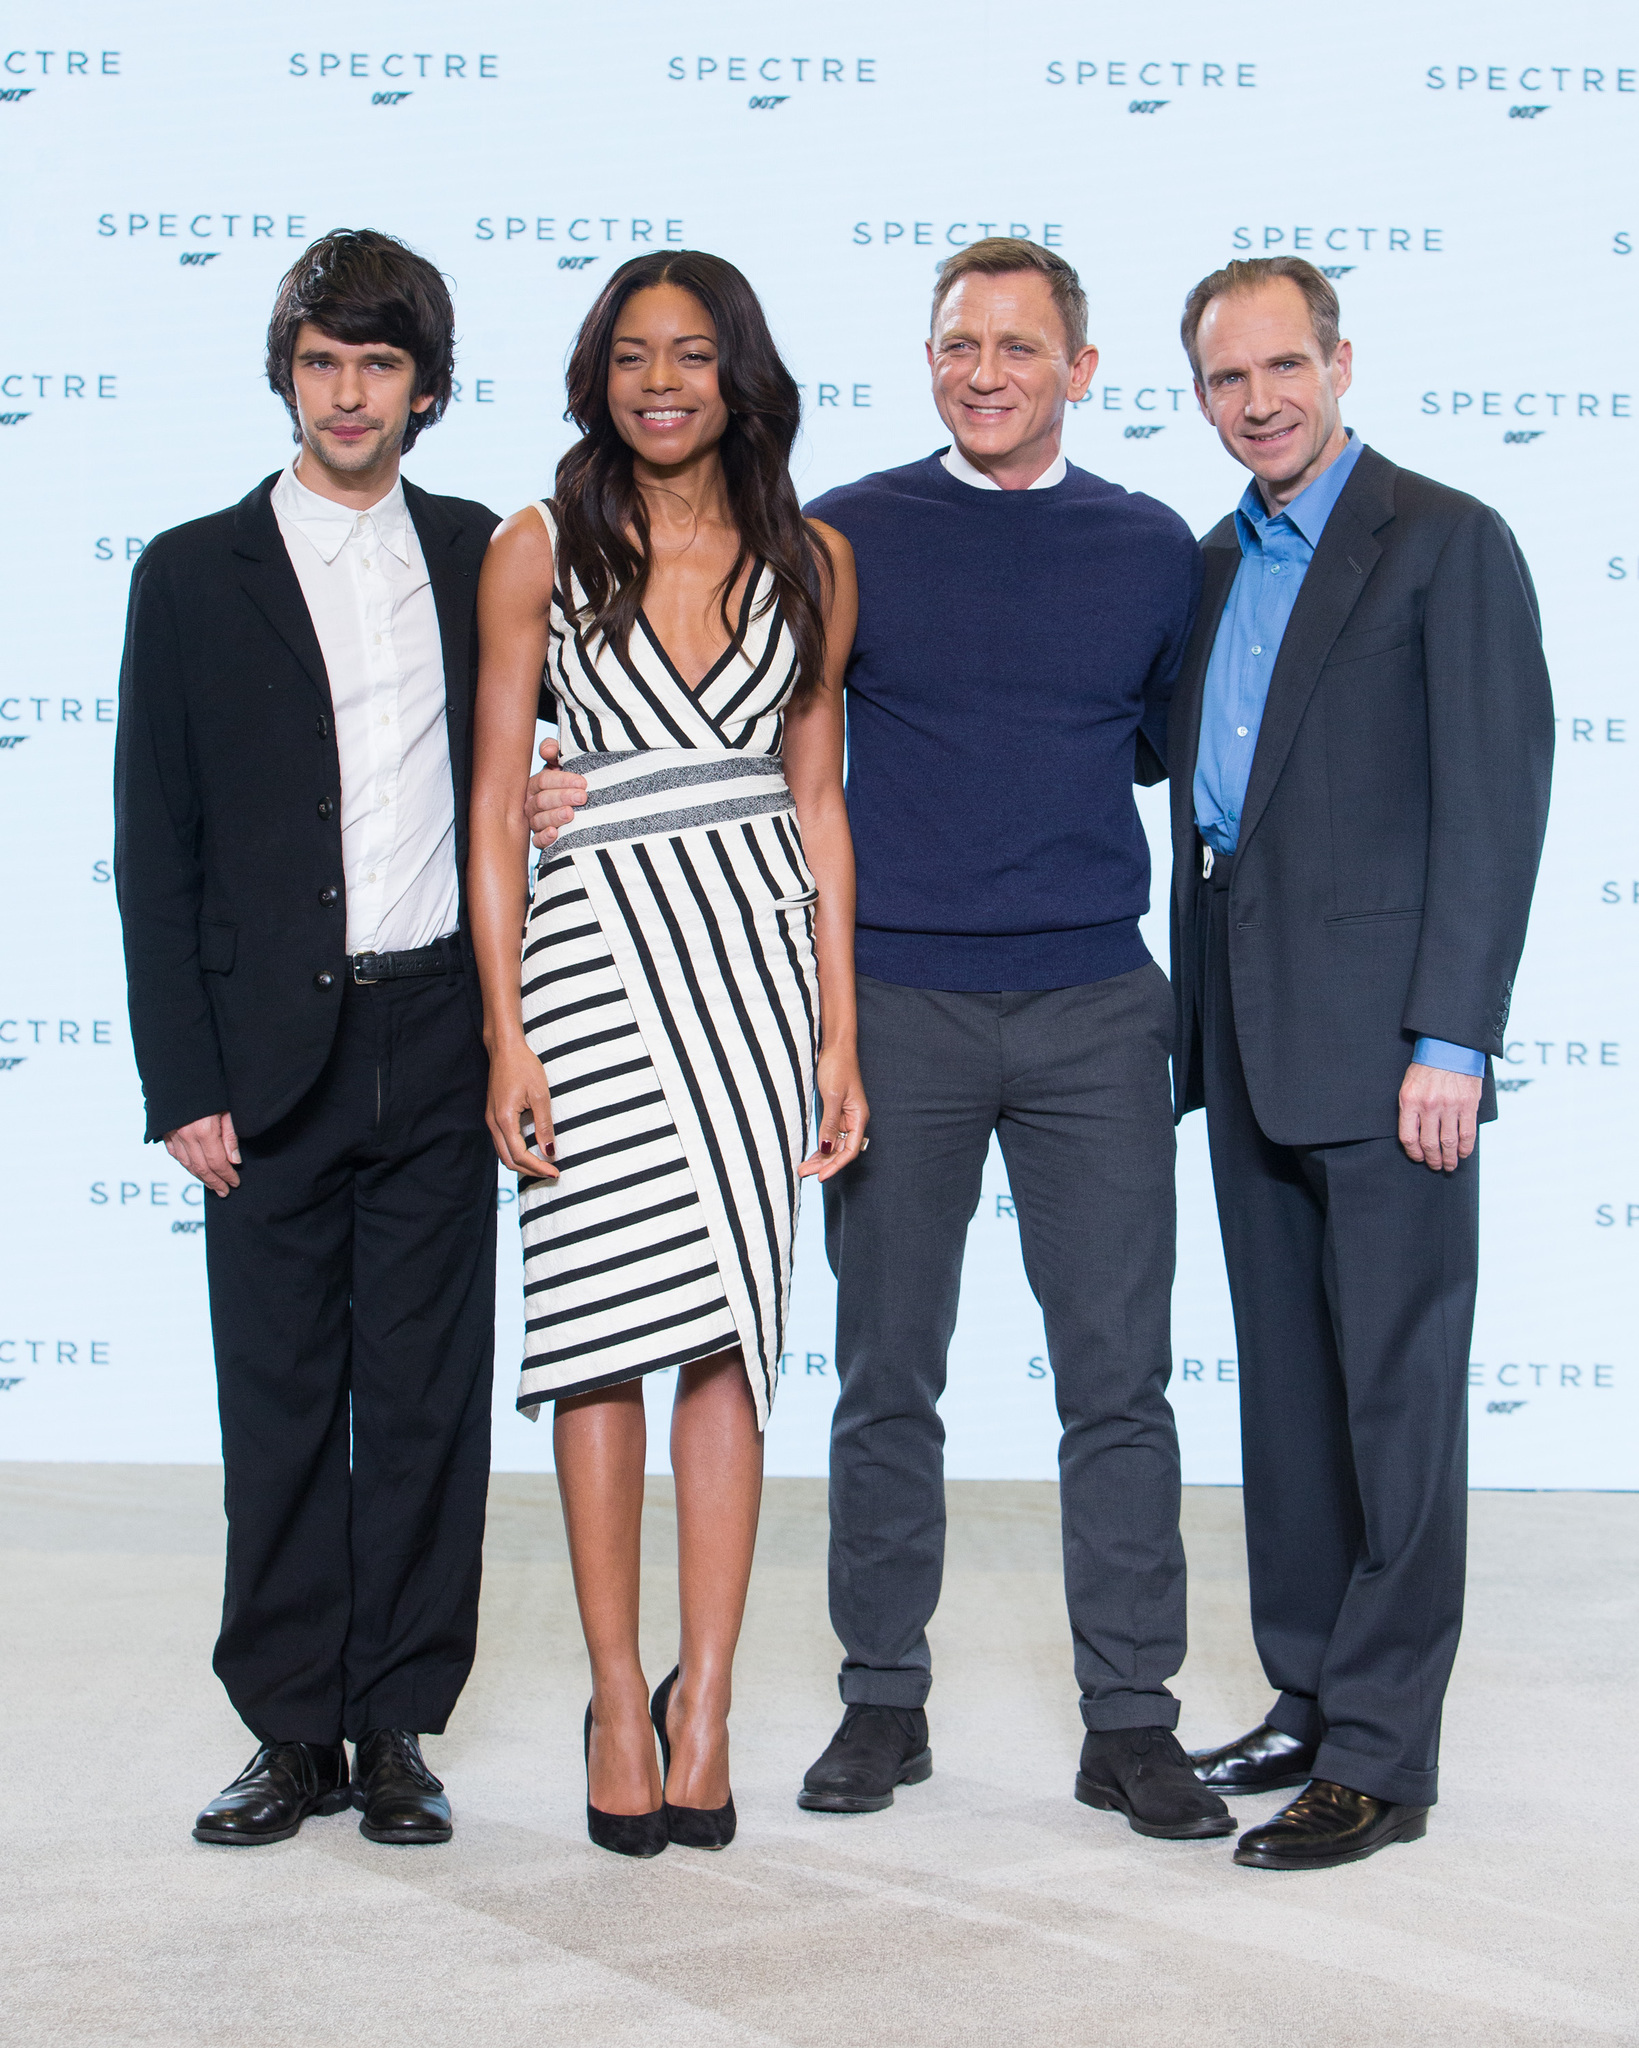 Ralph Fiennes, Daniel Craig, Naomie Harris and Ben Whishaw at event of Spectre (2015)